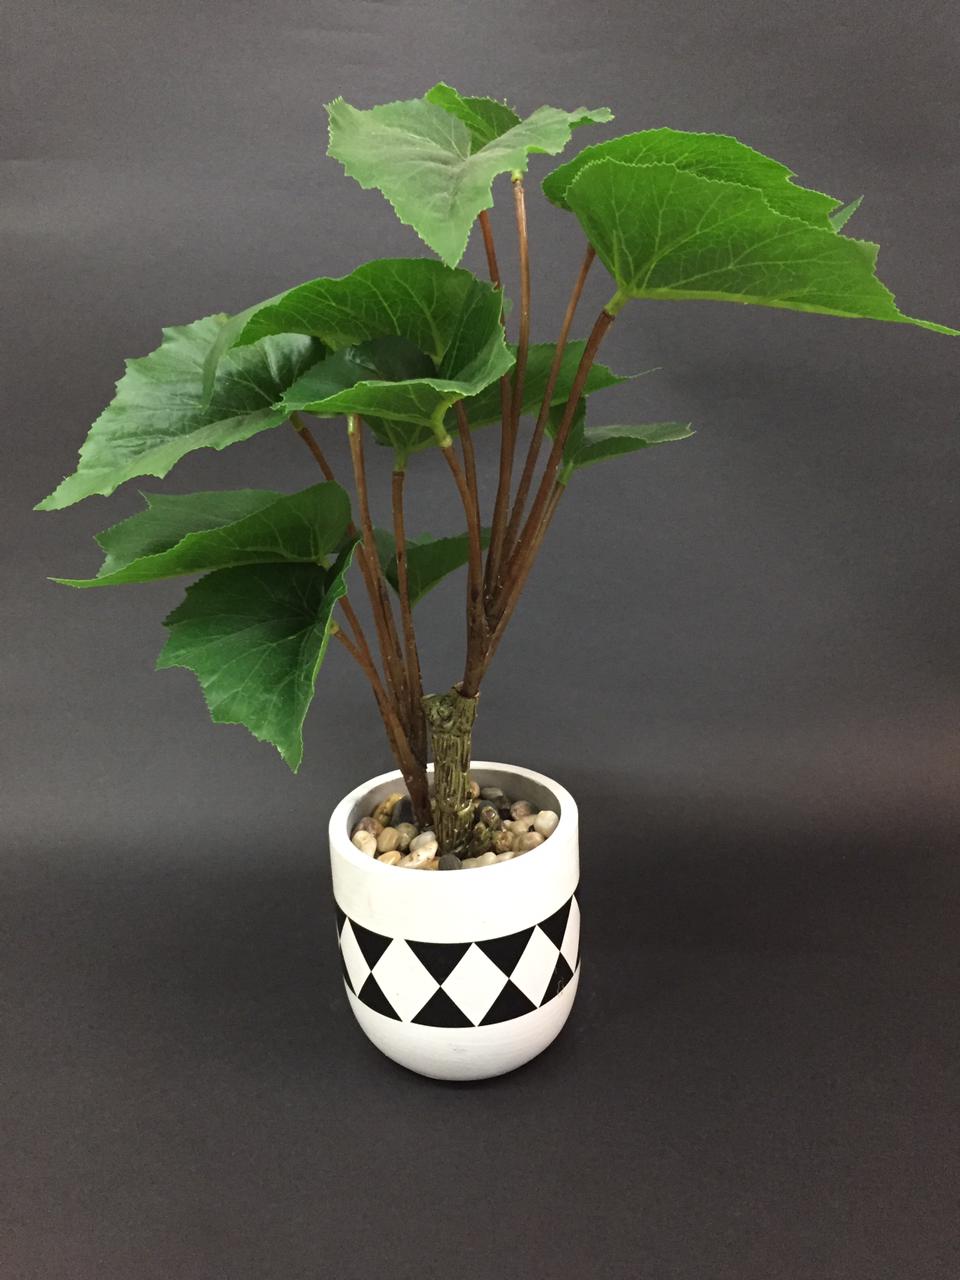 Leopard Plant In Monochrome Based Theme Pots Indoor Décor Tamrapatra